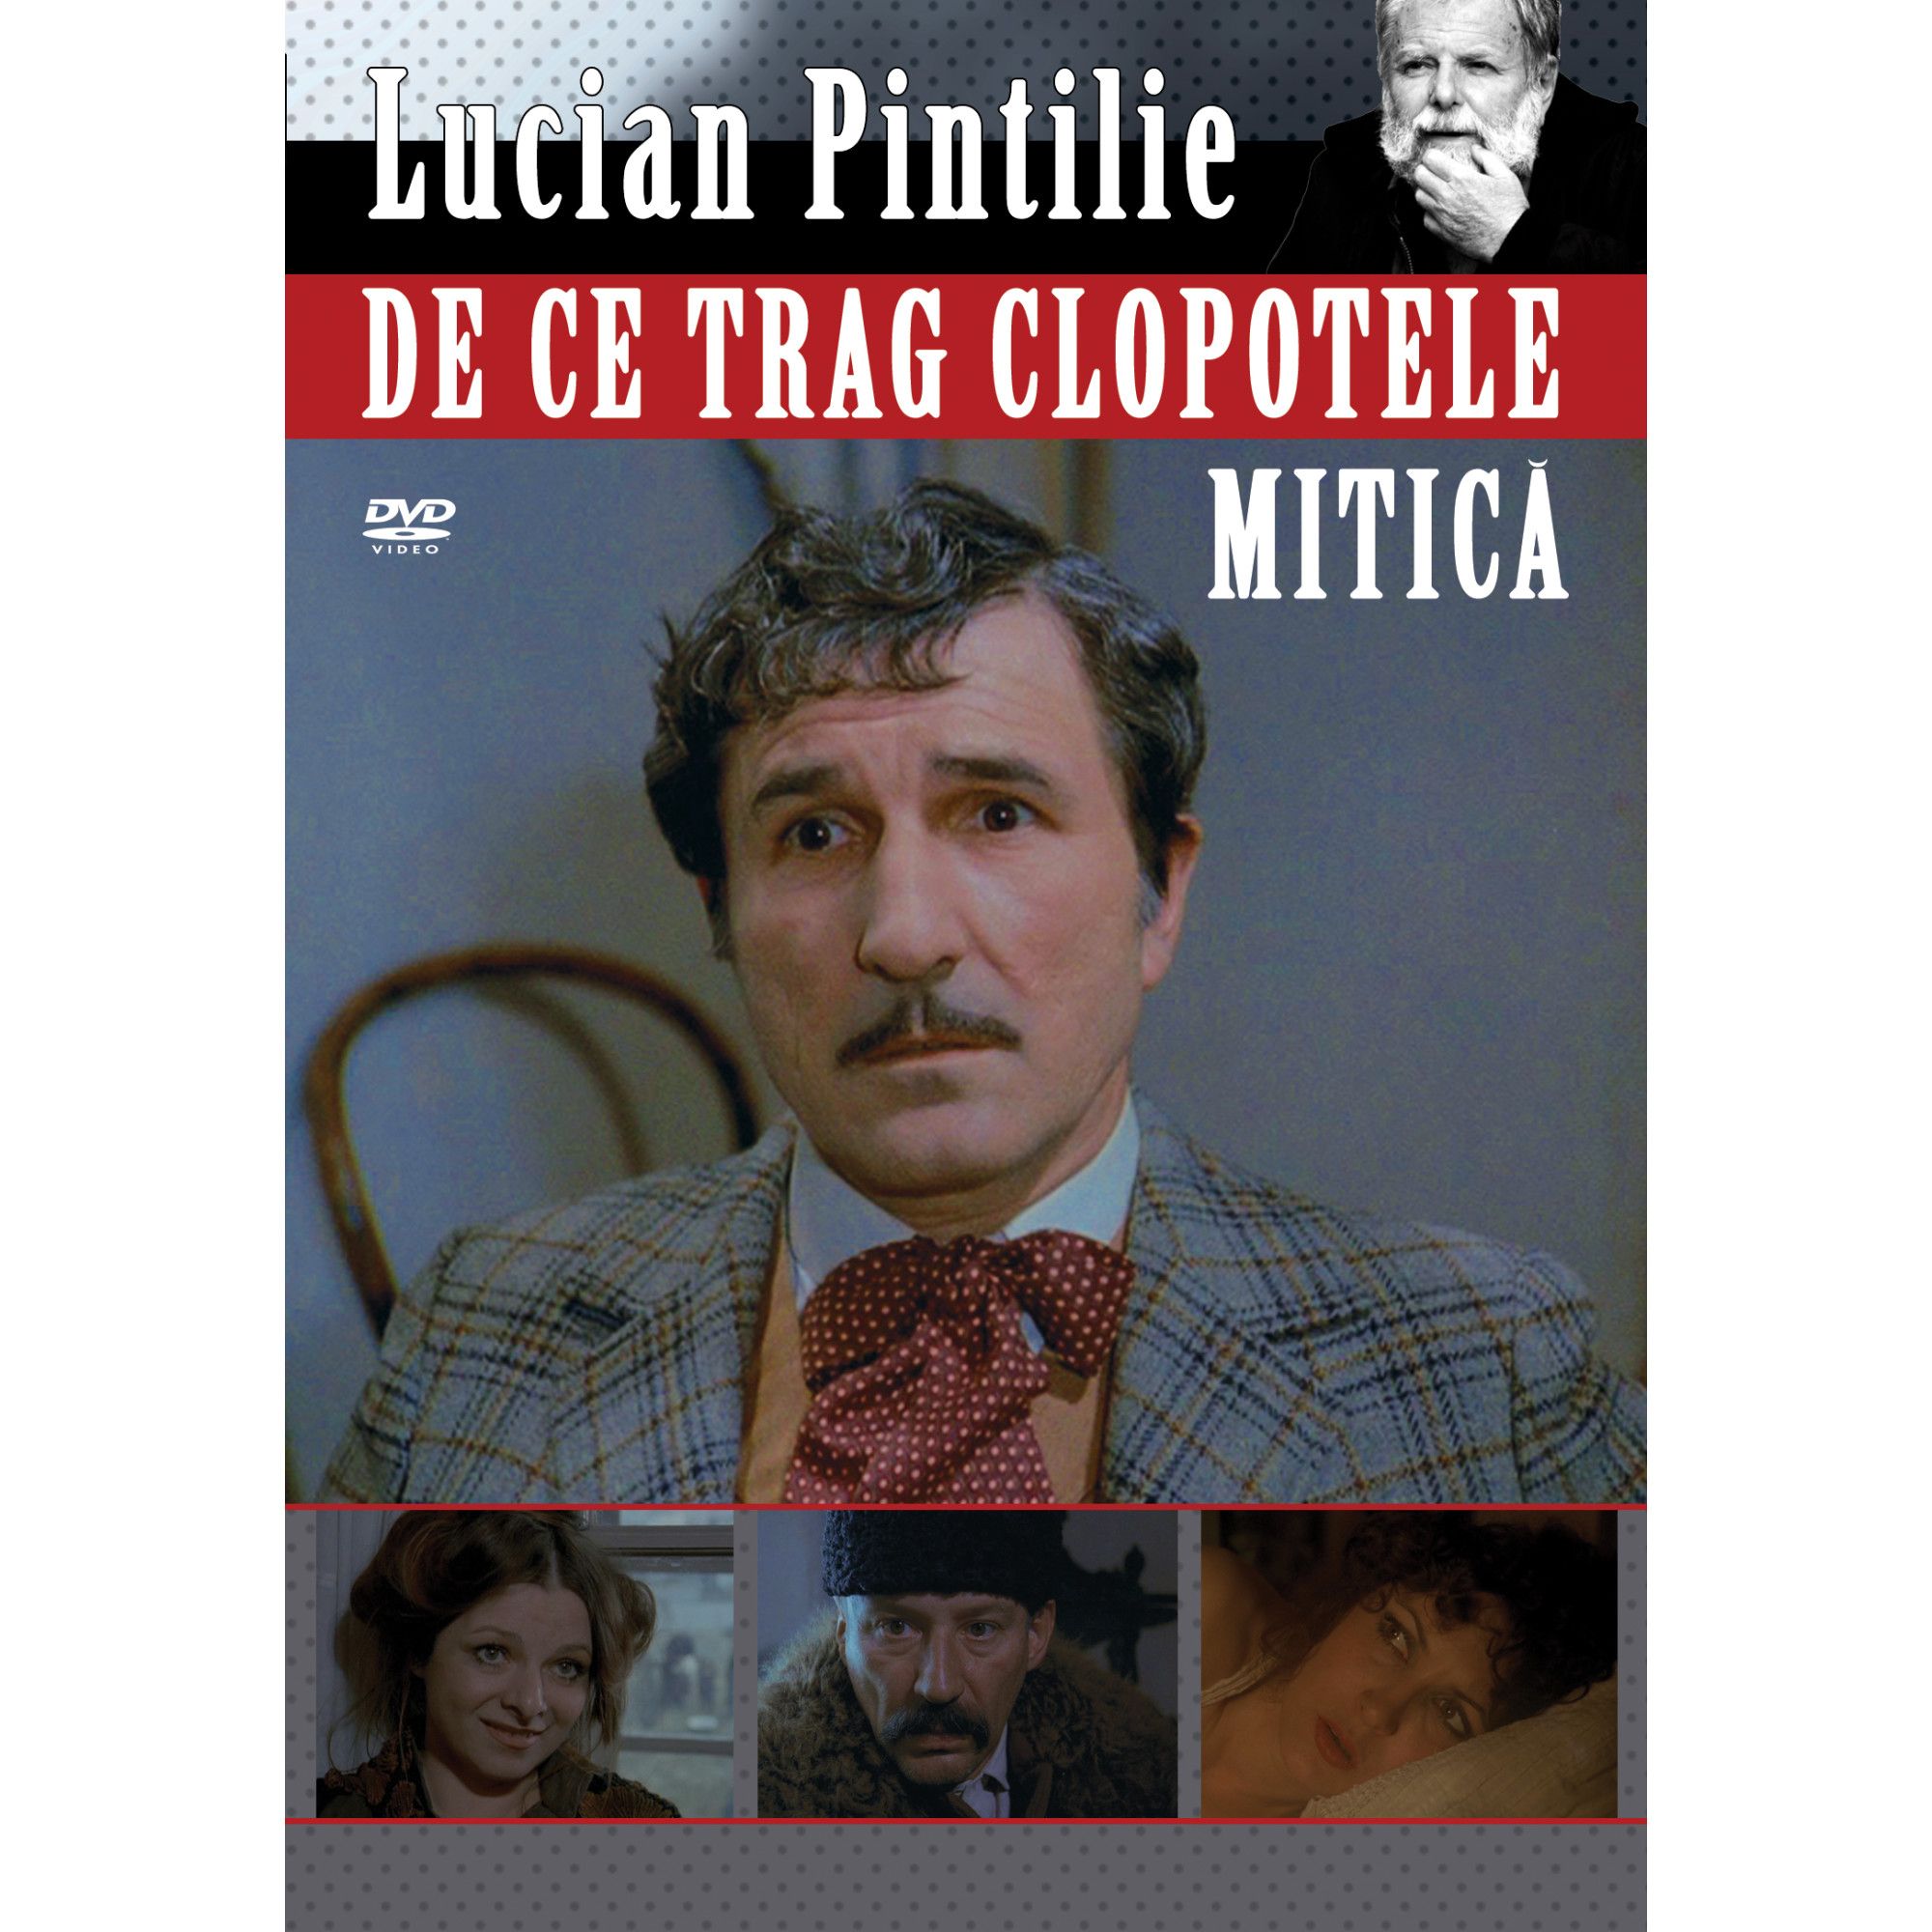 Cover of the DVD of Lucian Pintilie’s film De ce trag clopotele, Mitică? (Why are the bells ringing, Mitică?)